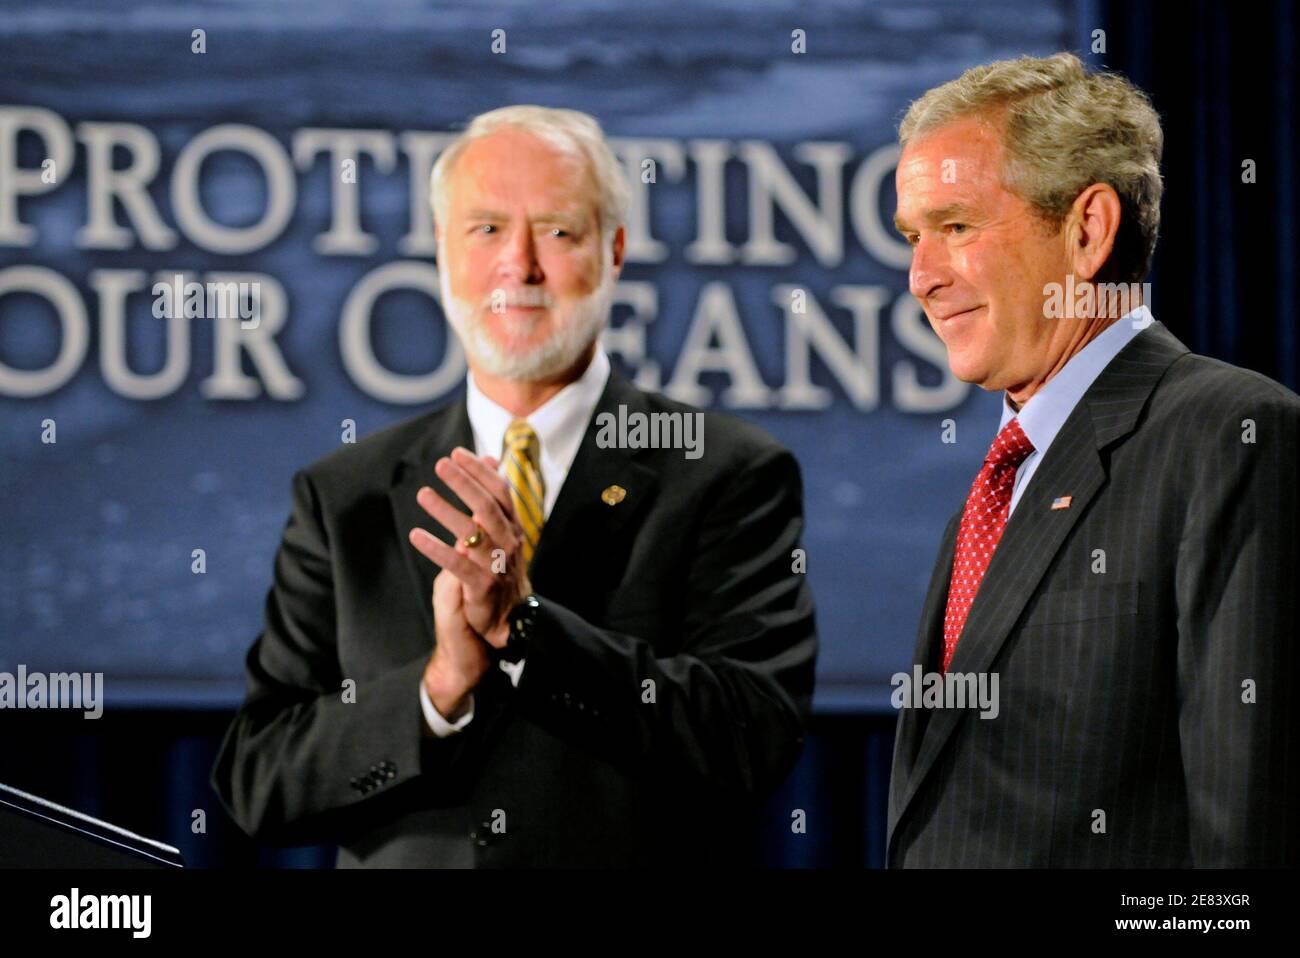 U.S. President George W. Bush (R) is applauded by Smithsonian Institute Secretary Wayne Clough prior to making remarks on U.S. Ocean Action Plan at the Smithsonian Museum of Natural History in Washington September 26, 2008. REUTERS/Mike Theiler  (UNITED STATES) Stock Photo